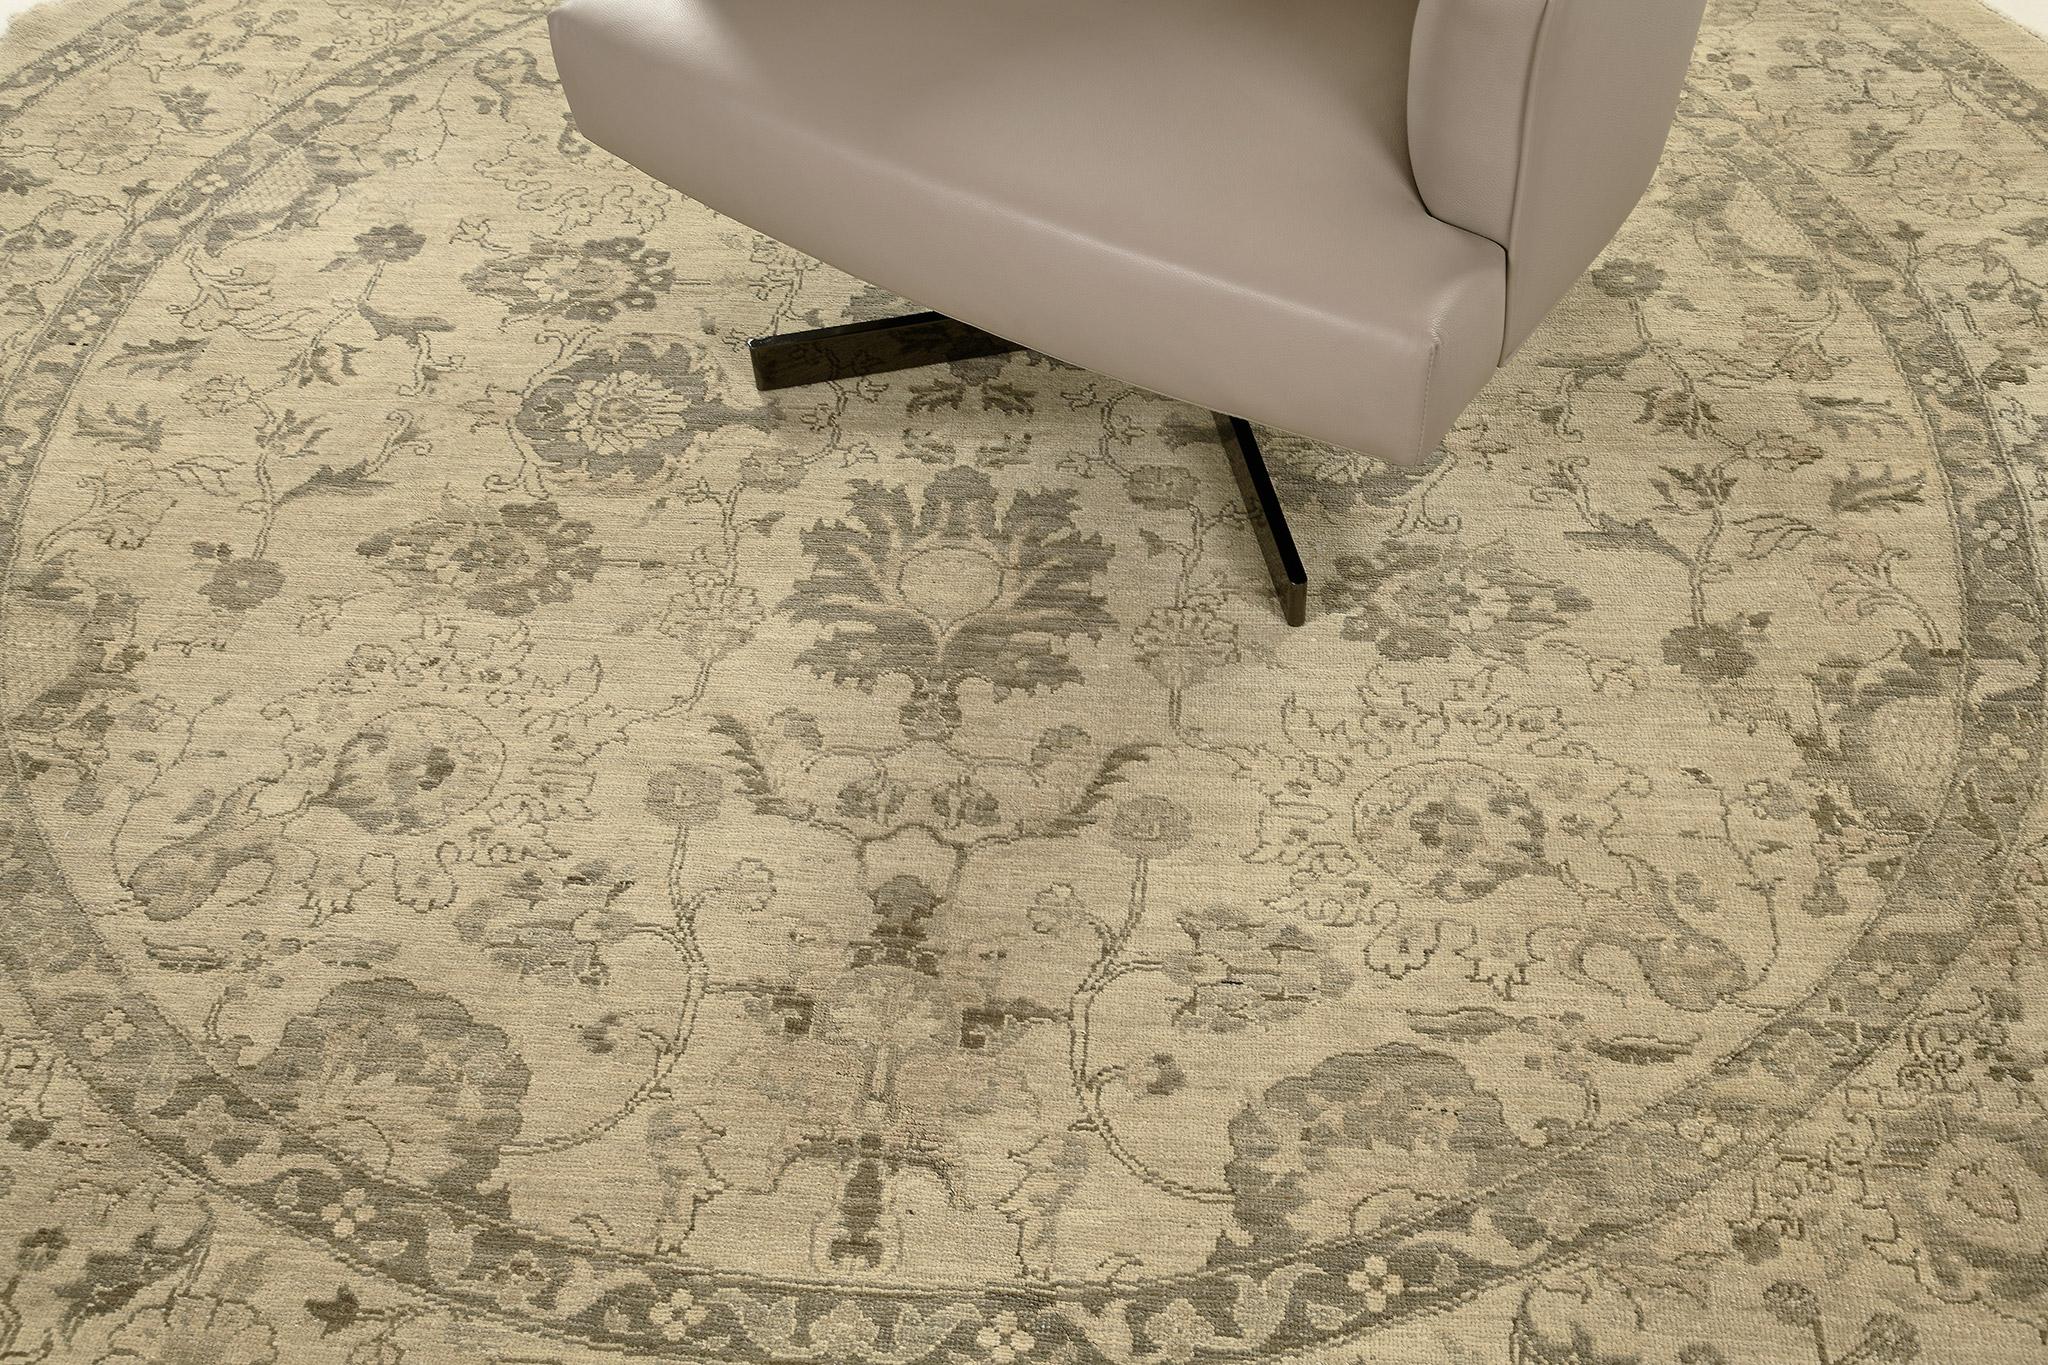 This stylish revival of the round rug was made from hand-spun wool and woven meticulously all the blooming palmettes, leafy tendrils, and stylized florid borders surrounded by symmetrical floral elements. A natural hue gives a breath-taking to every